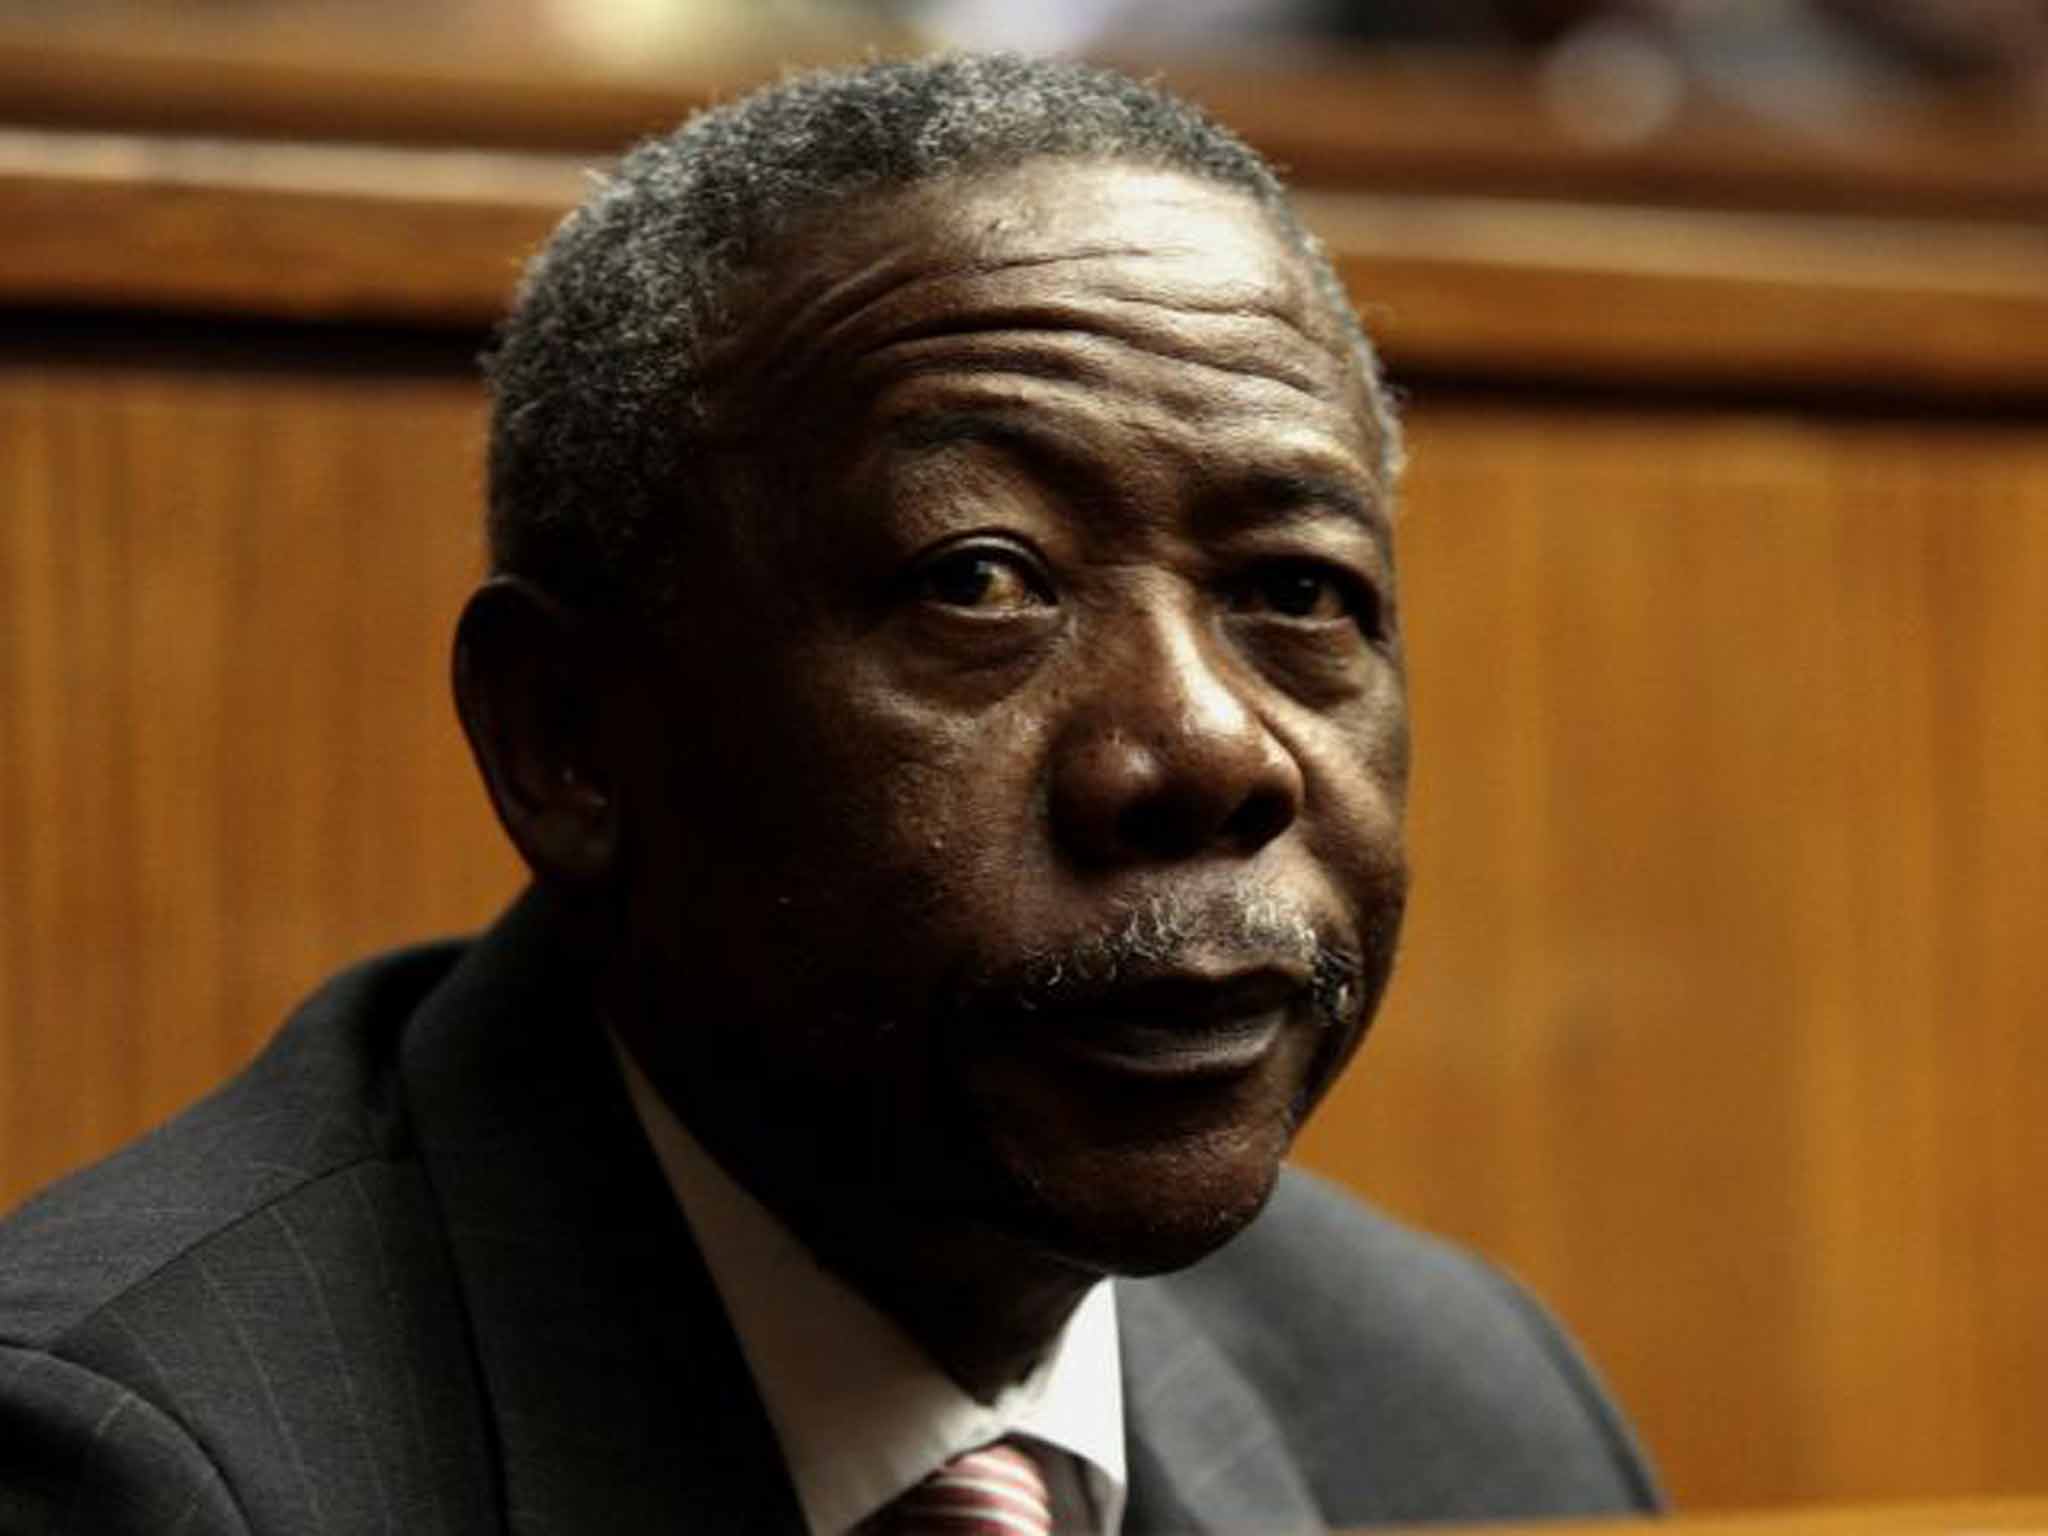 Selebi: sentencing him, the judge quoted his words back to him about fighting crime 'with clean hands'